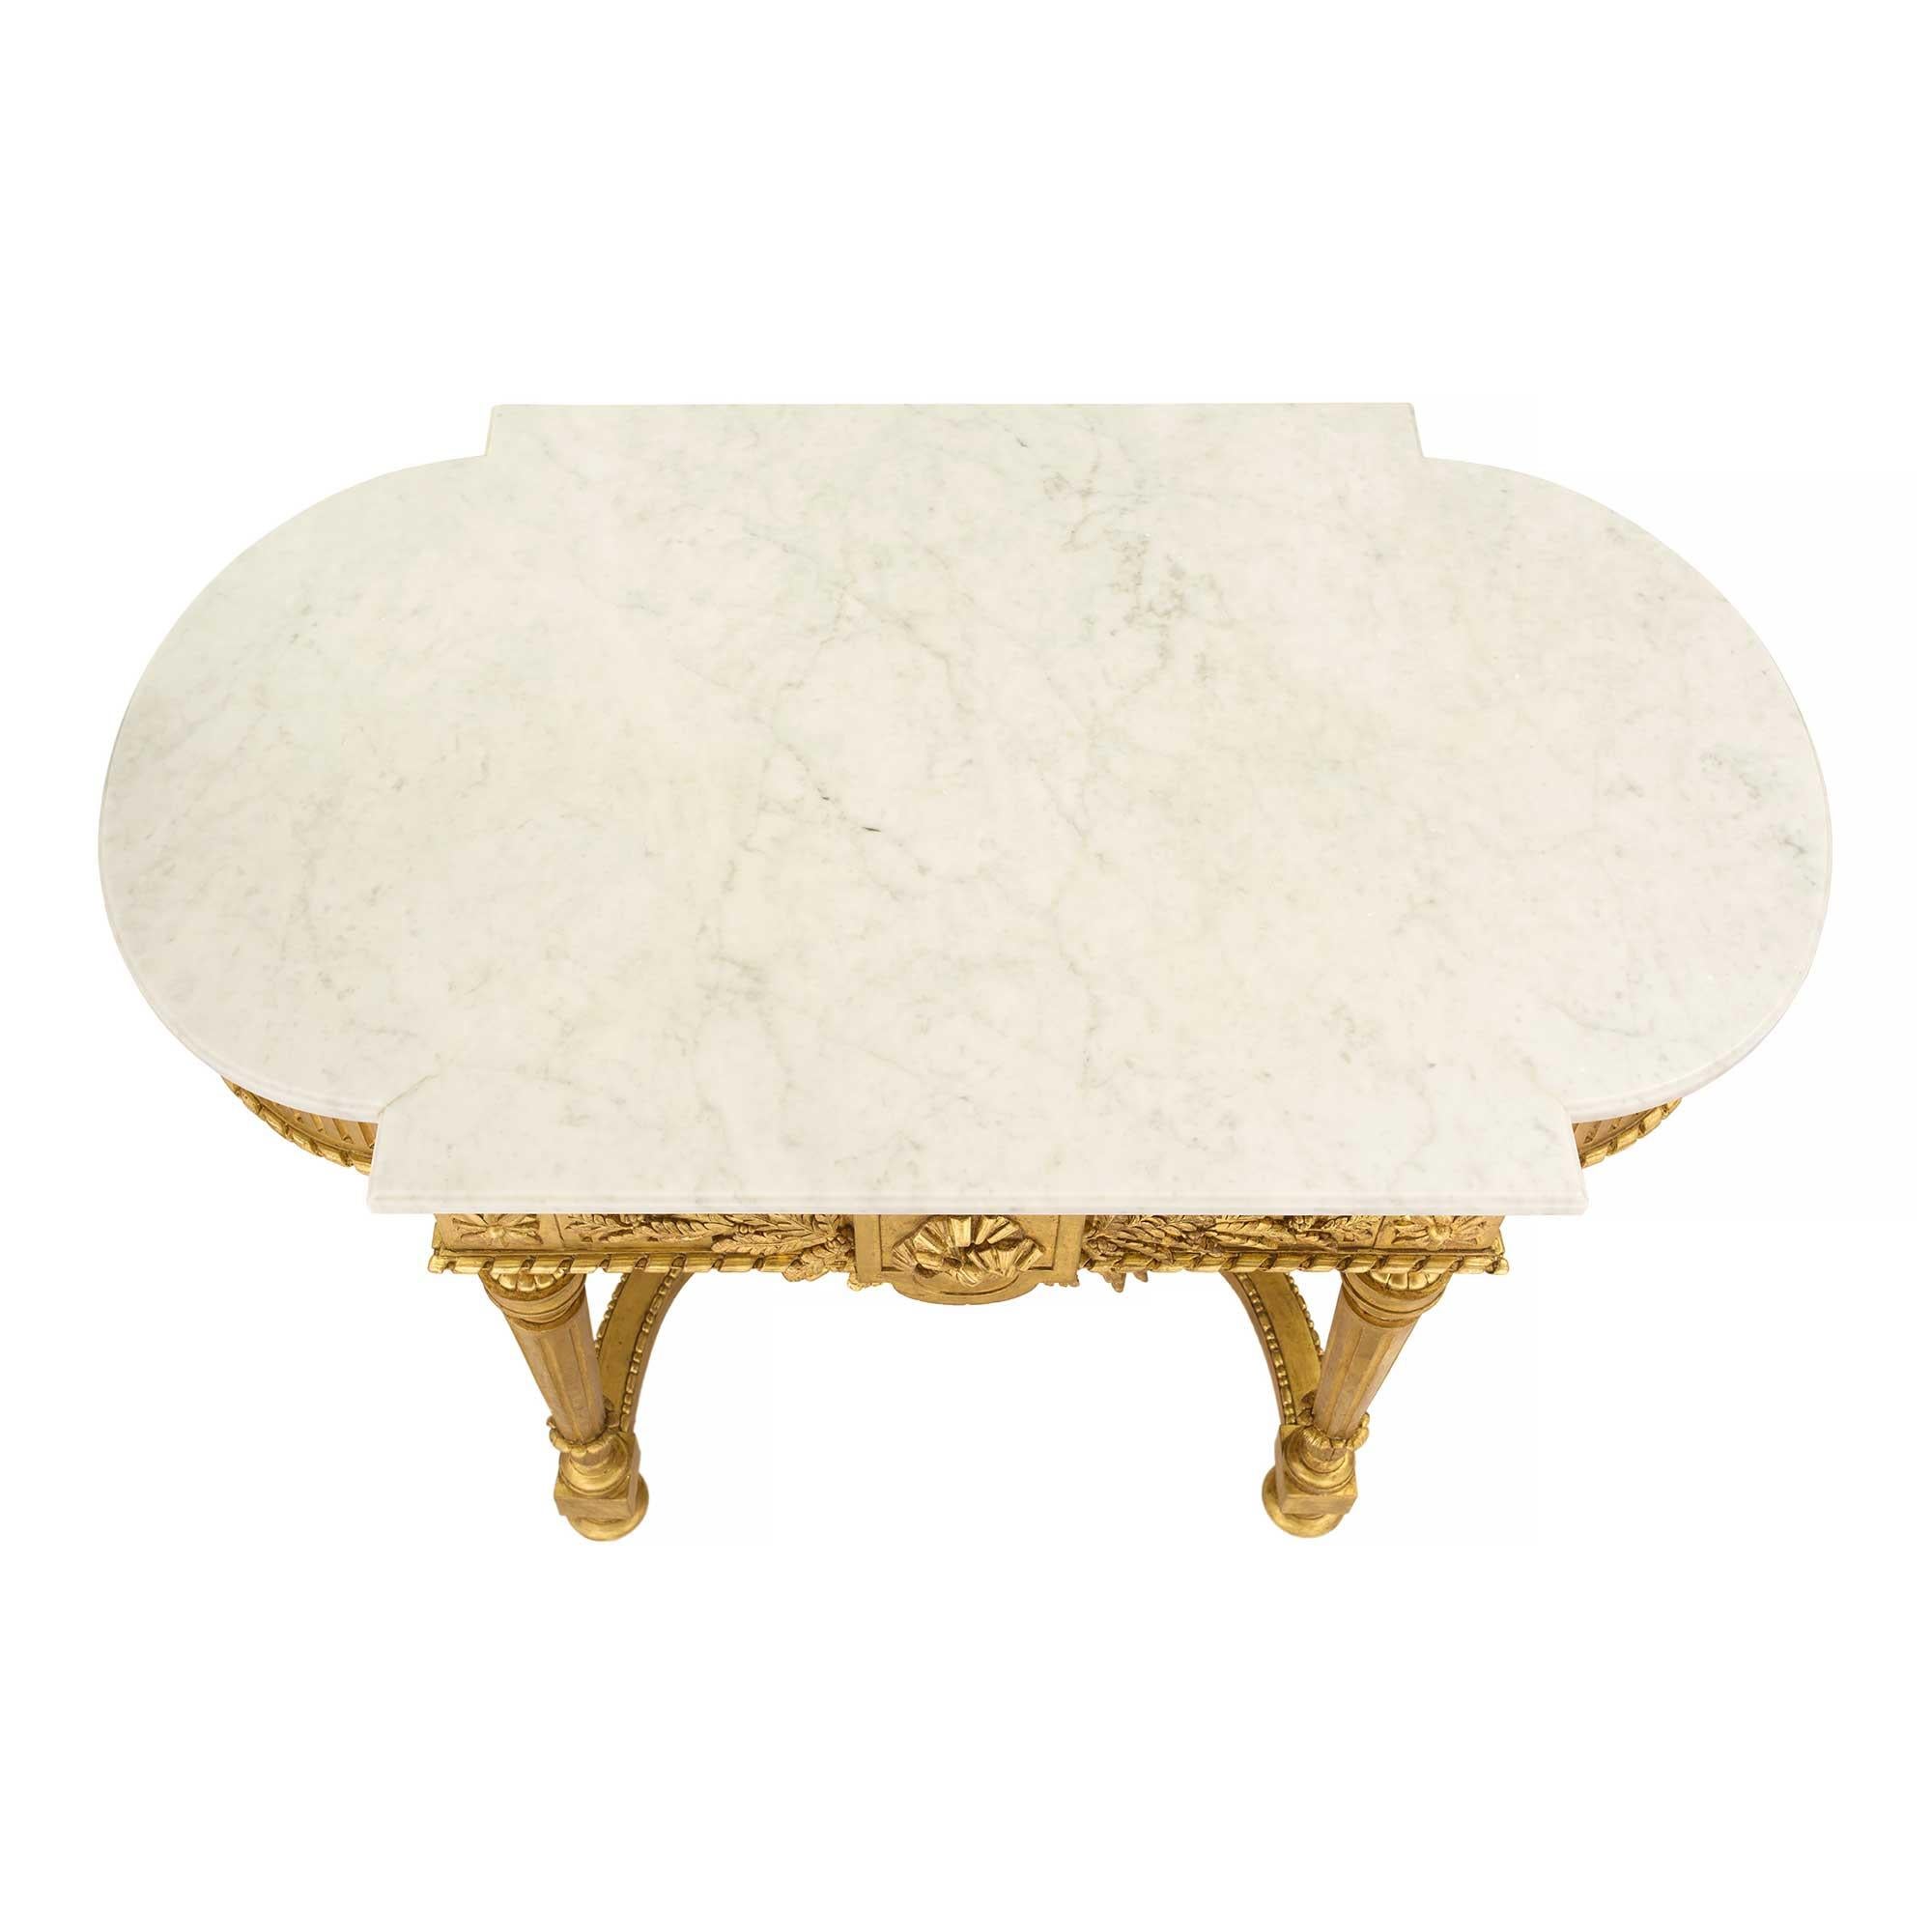 An exceptional and most elegant French 19th century Louis XVI st. giltwood and white Carrara marble oval center table. The table is raised by fine topie shaped feet below circular tapered fluted legs. The legs are connected by a most impressive